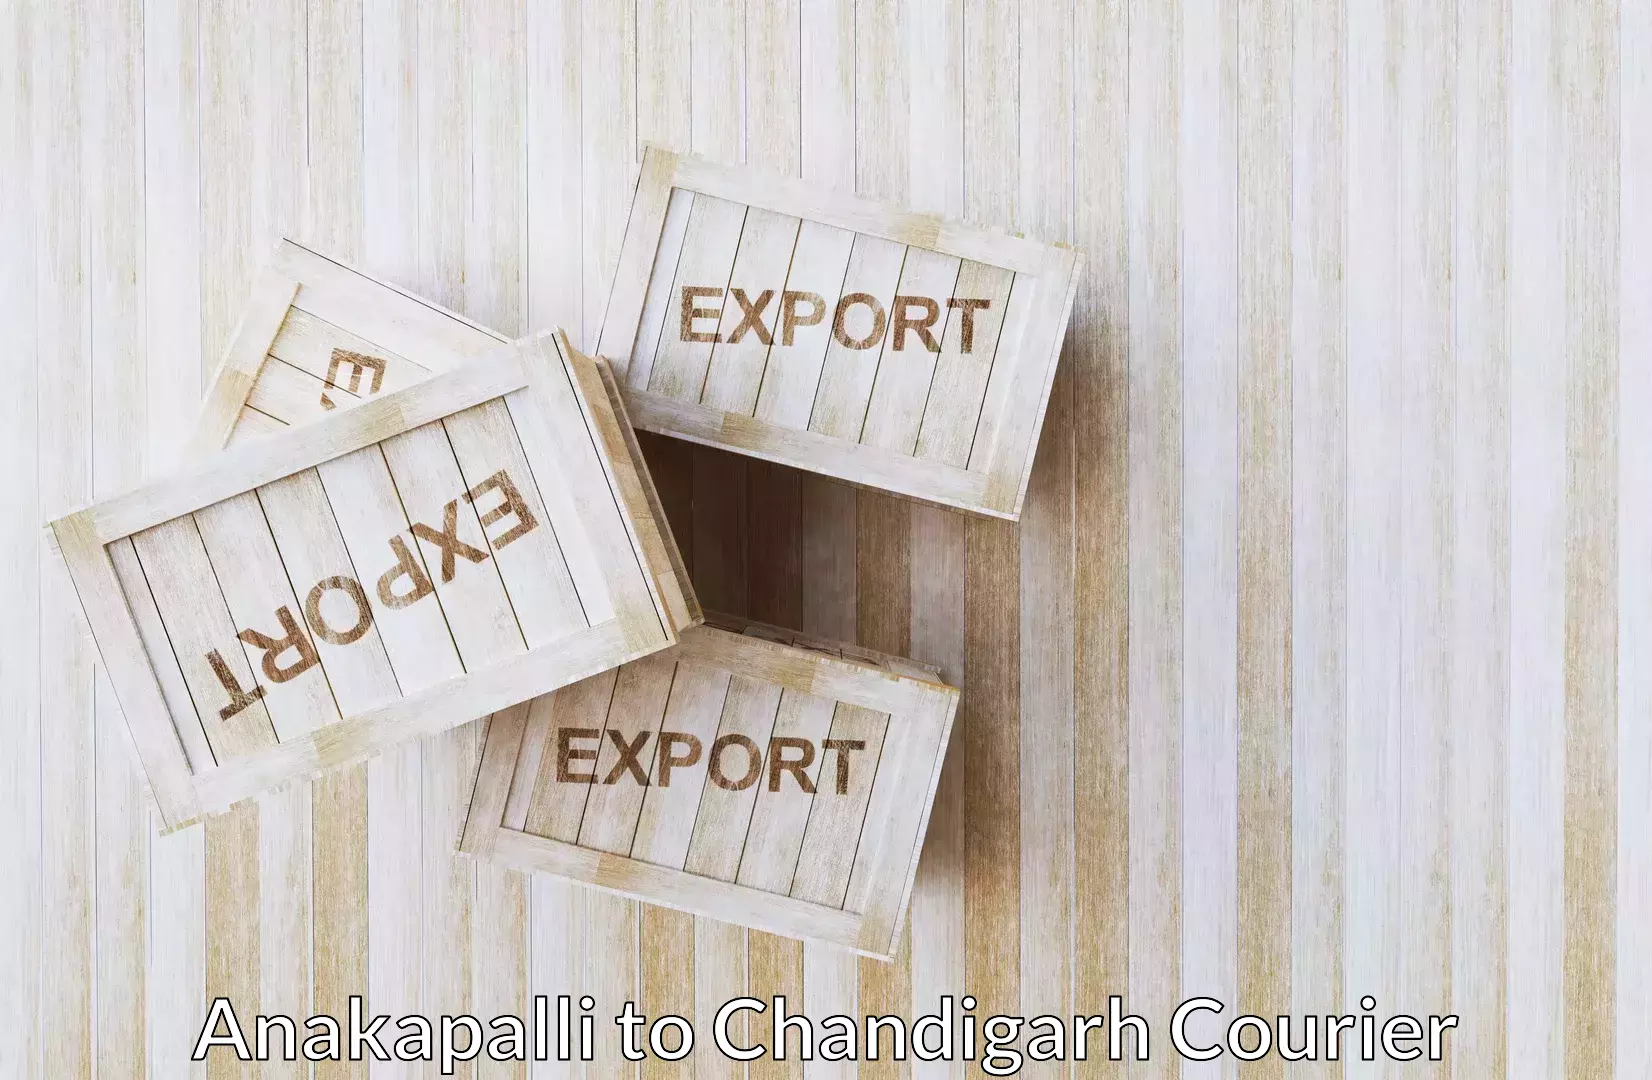 Residential moving experts Anakapalli to Chandigarh